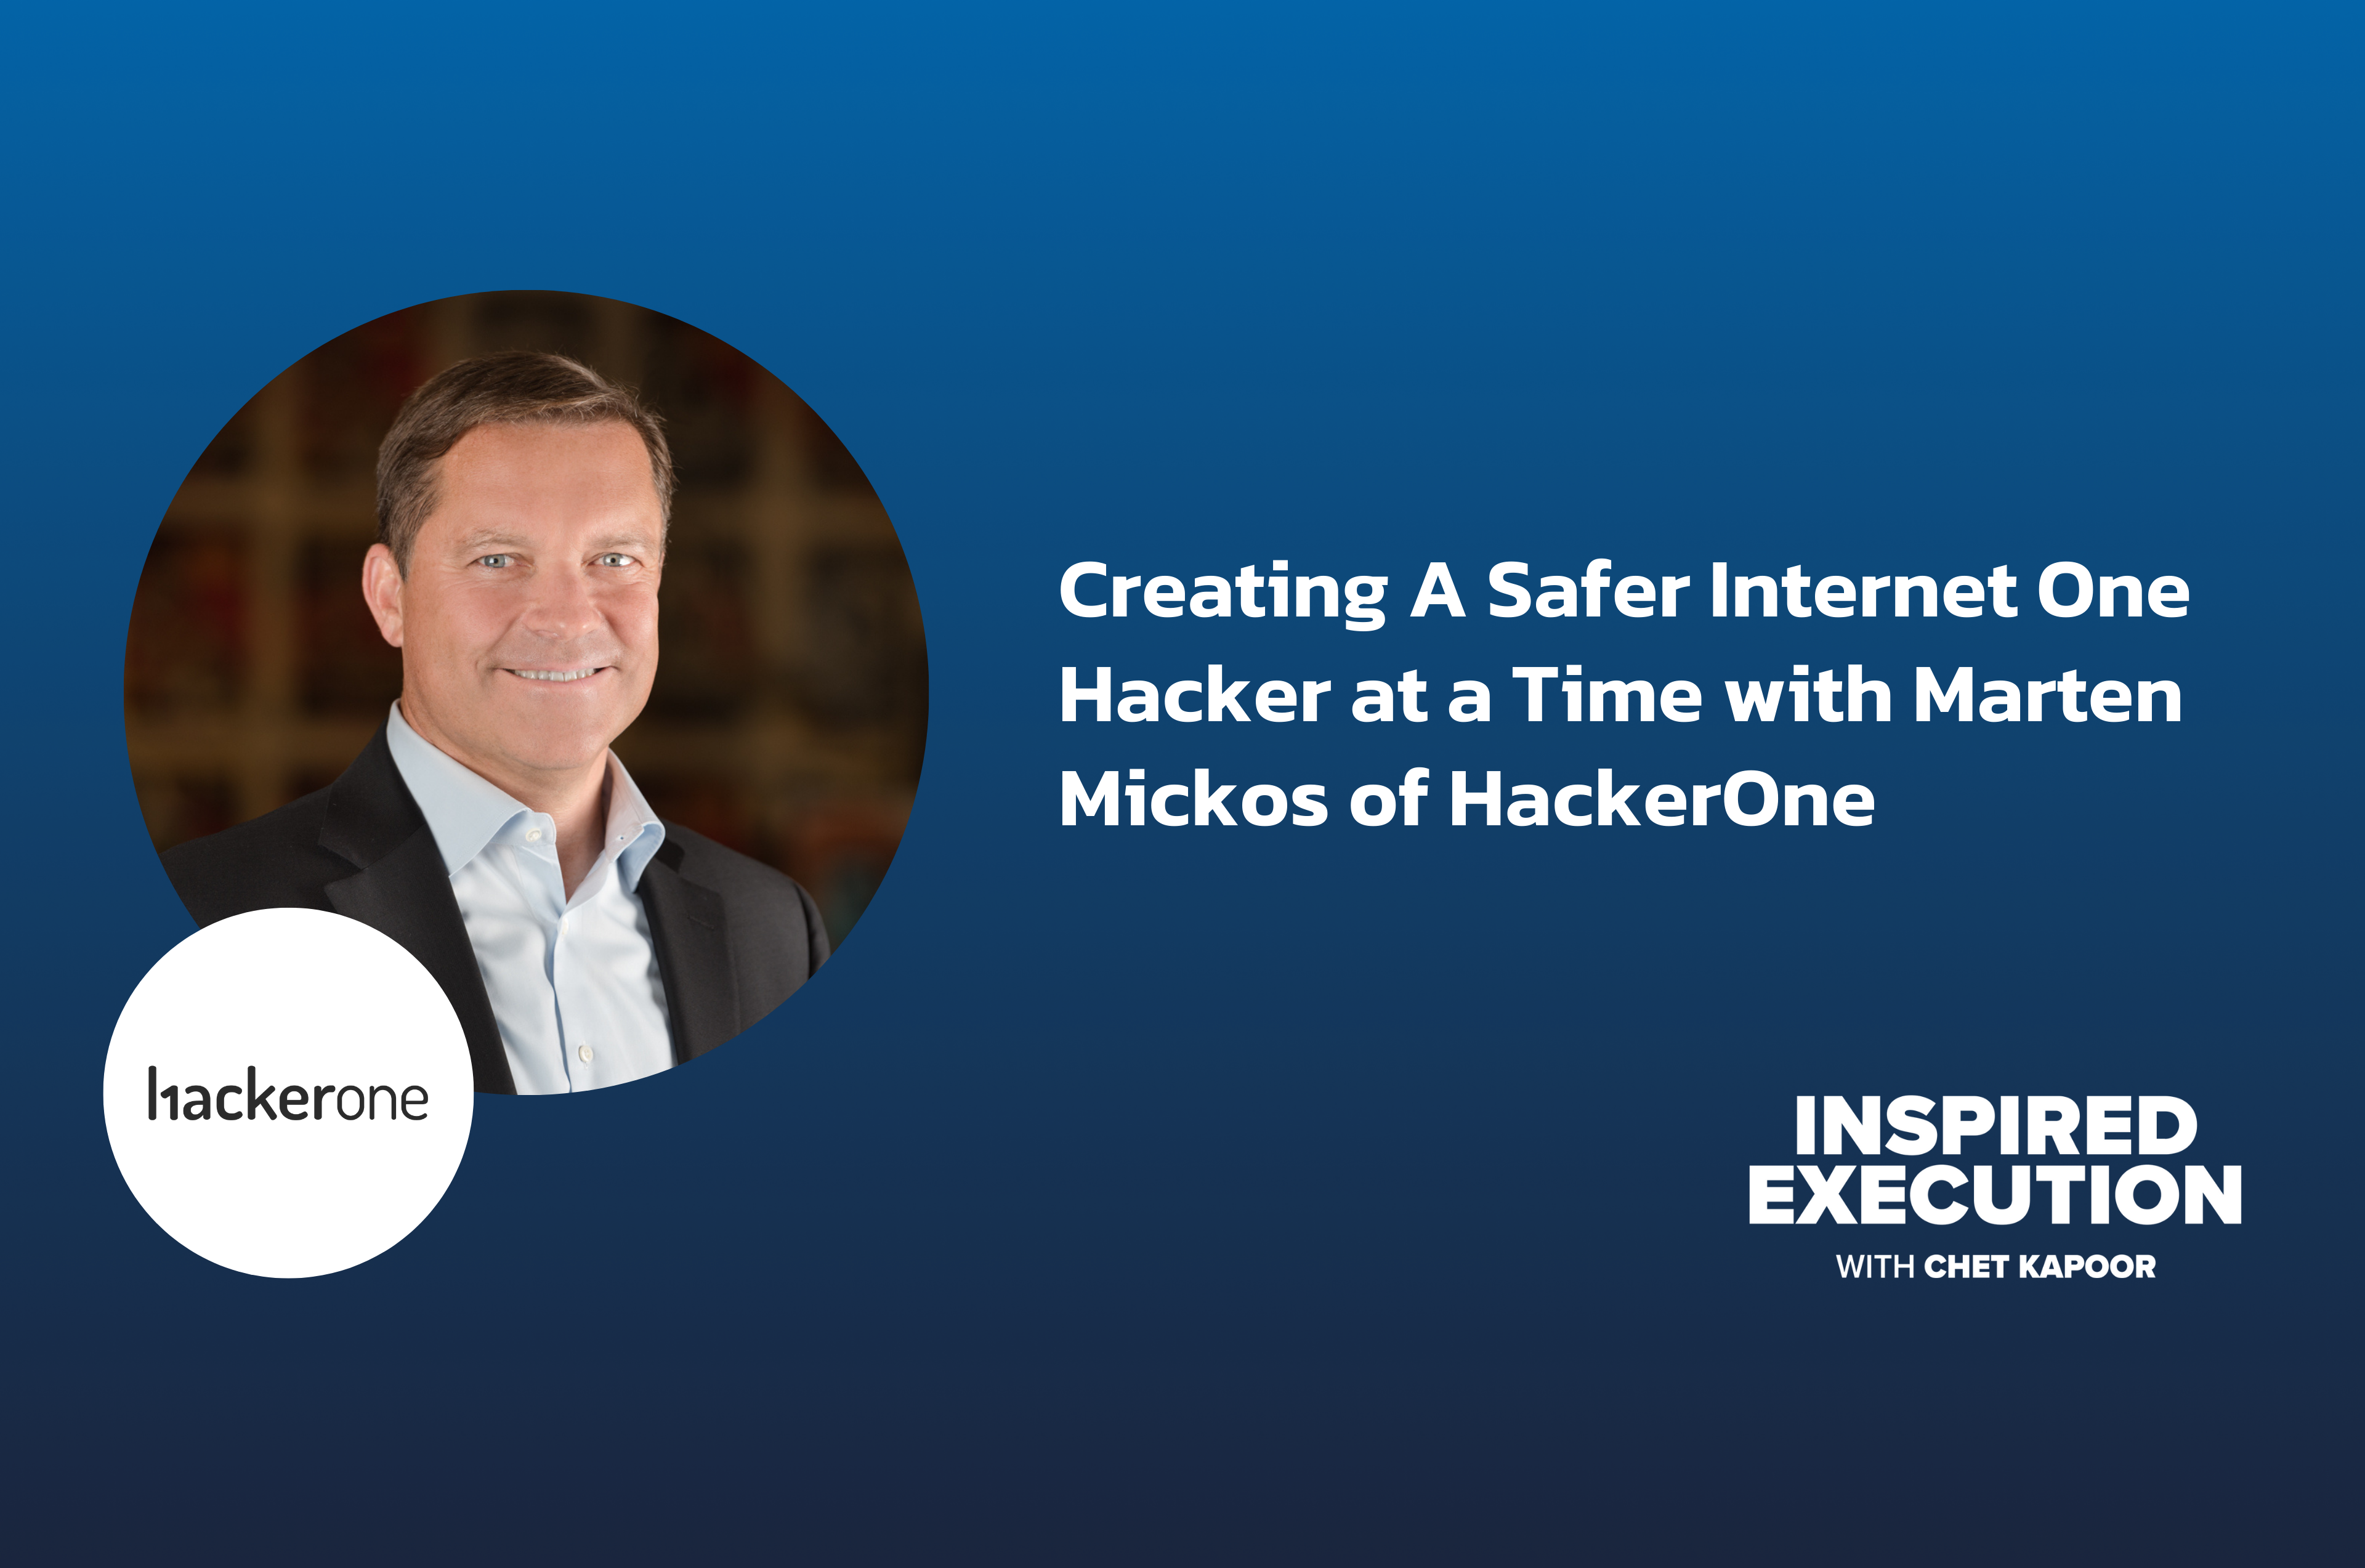 Creating A Safer Internet One Hacker at a Time with Marten Mickos of HackerOne